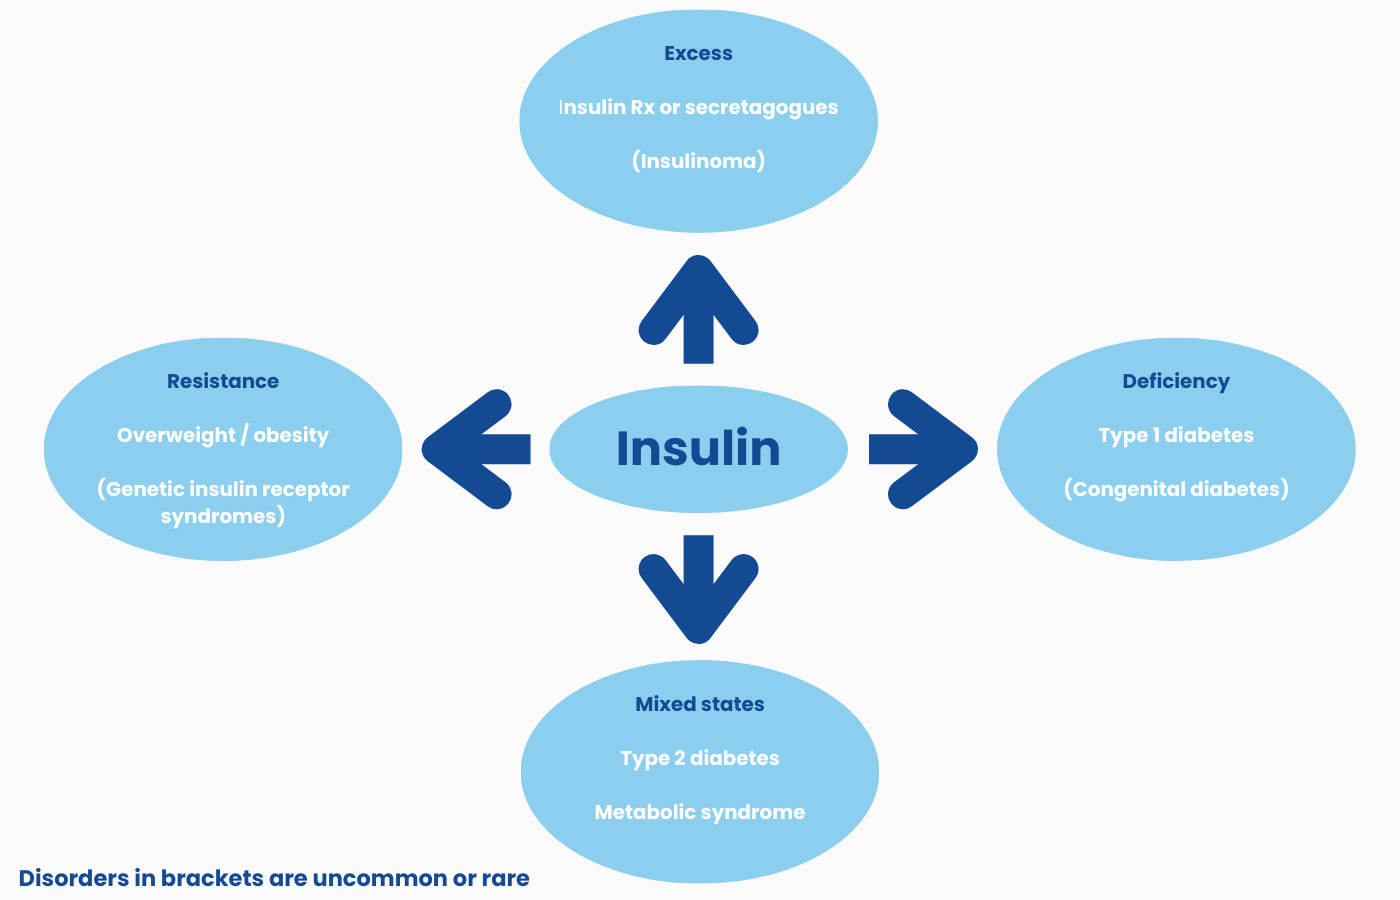 Simple infographic – diabetes excess, resistance, deficiency and mixed states